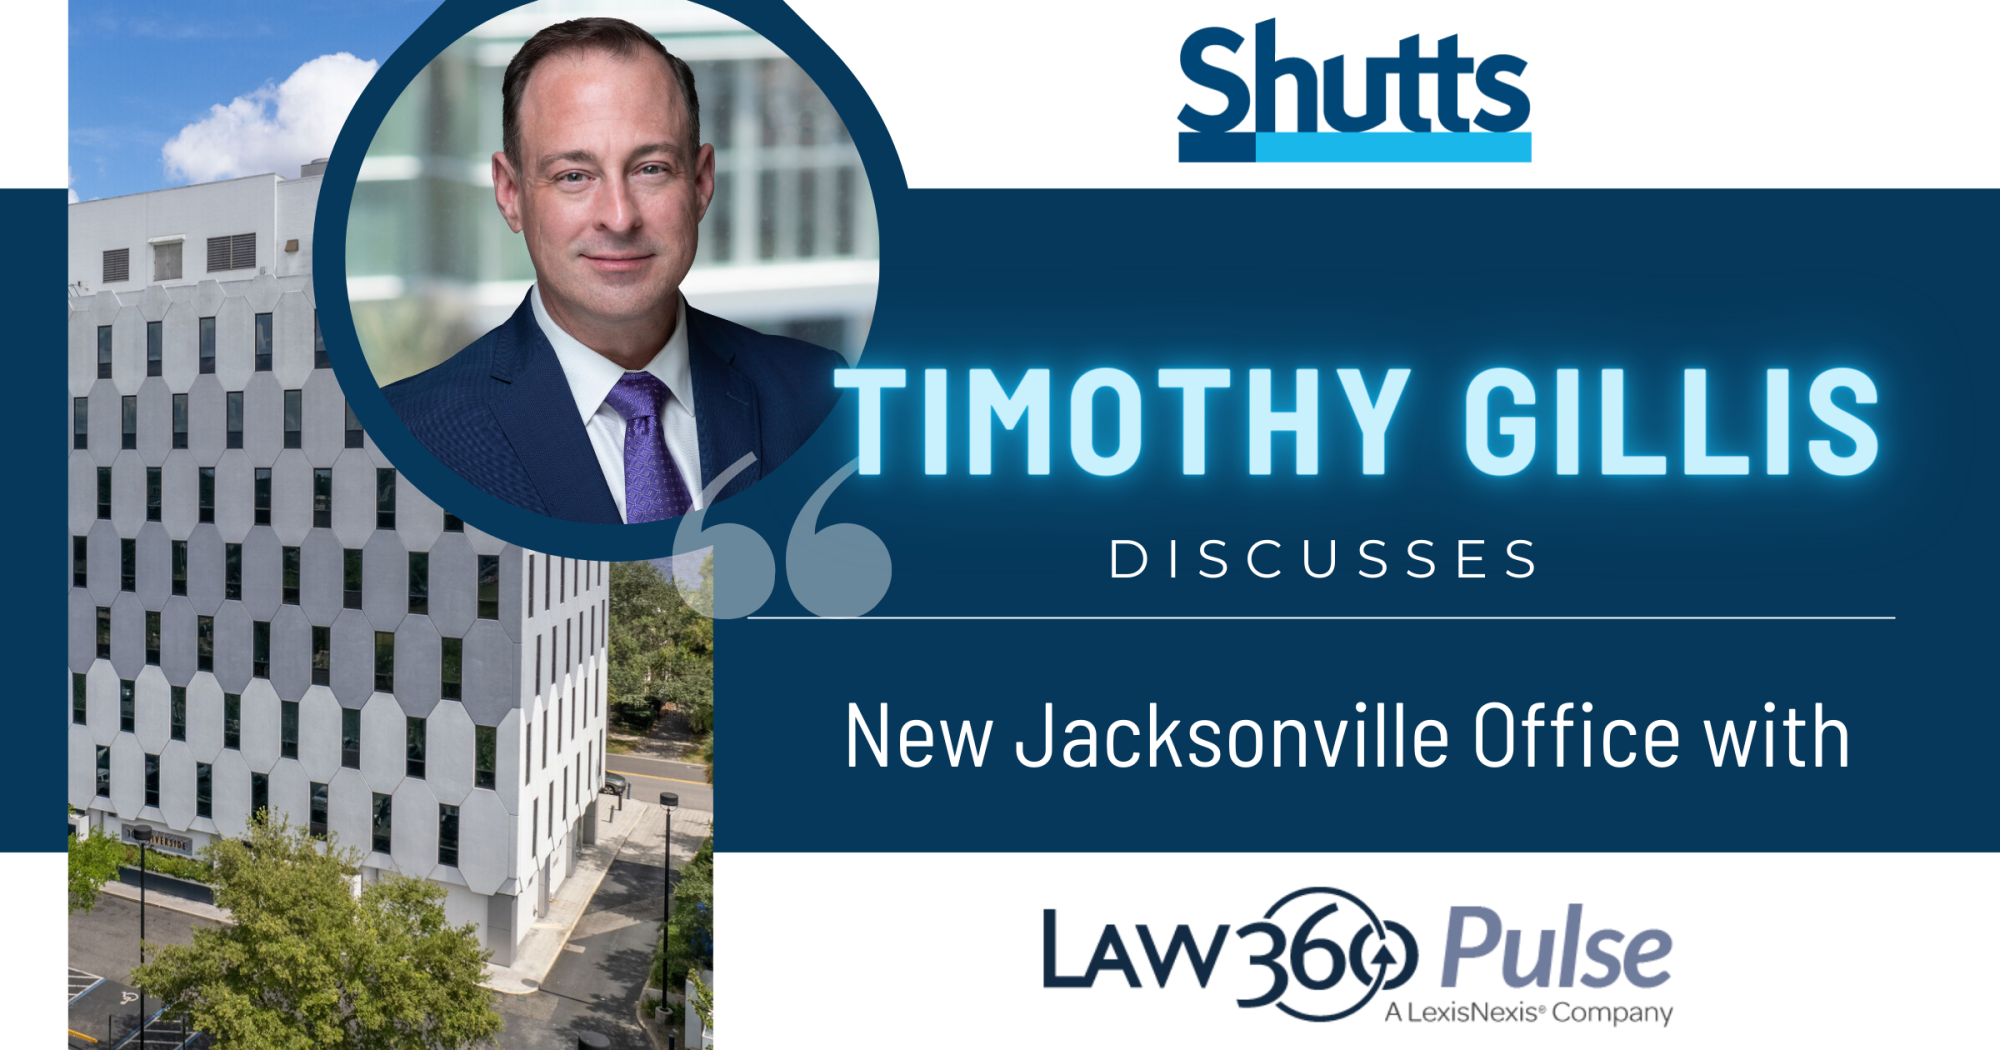 Timothy Gillis Discusses New Jacksonville Office with Law360 Pulse